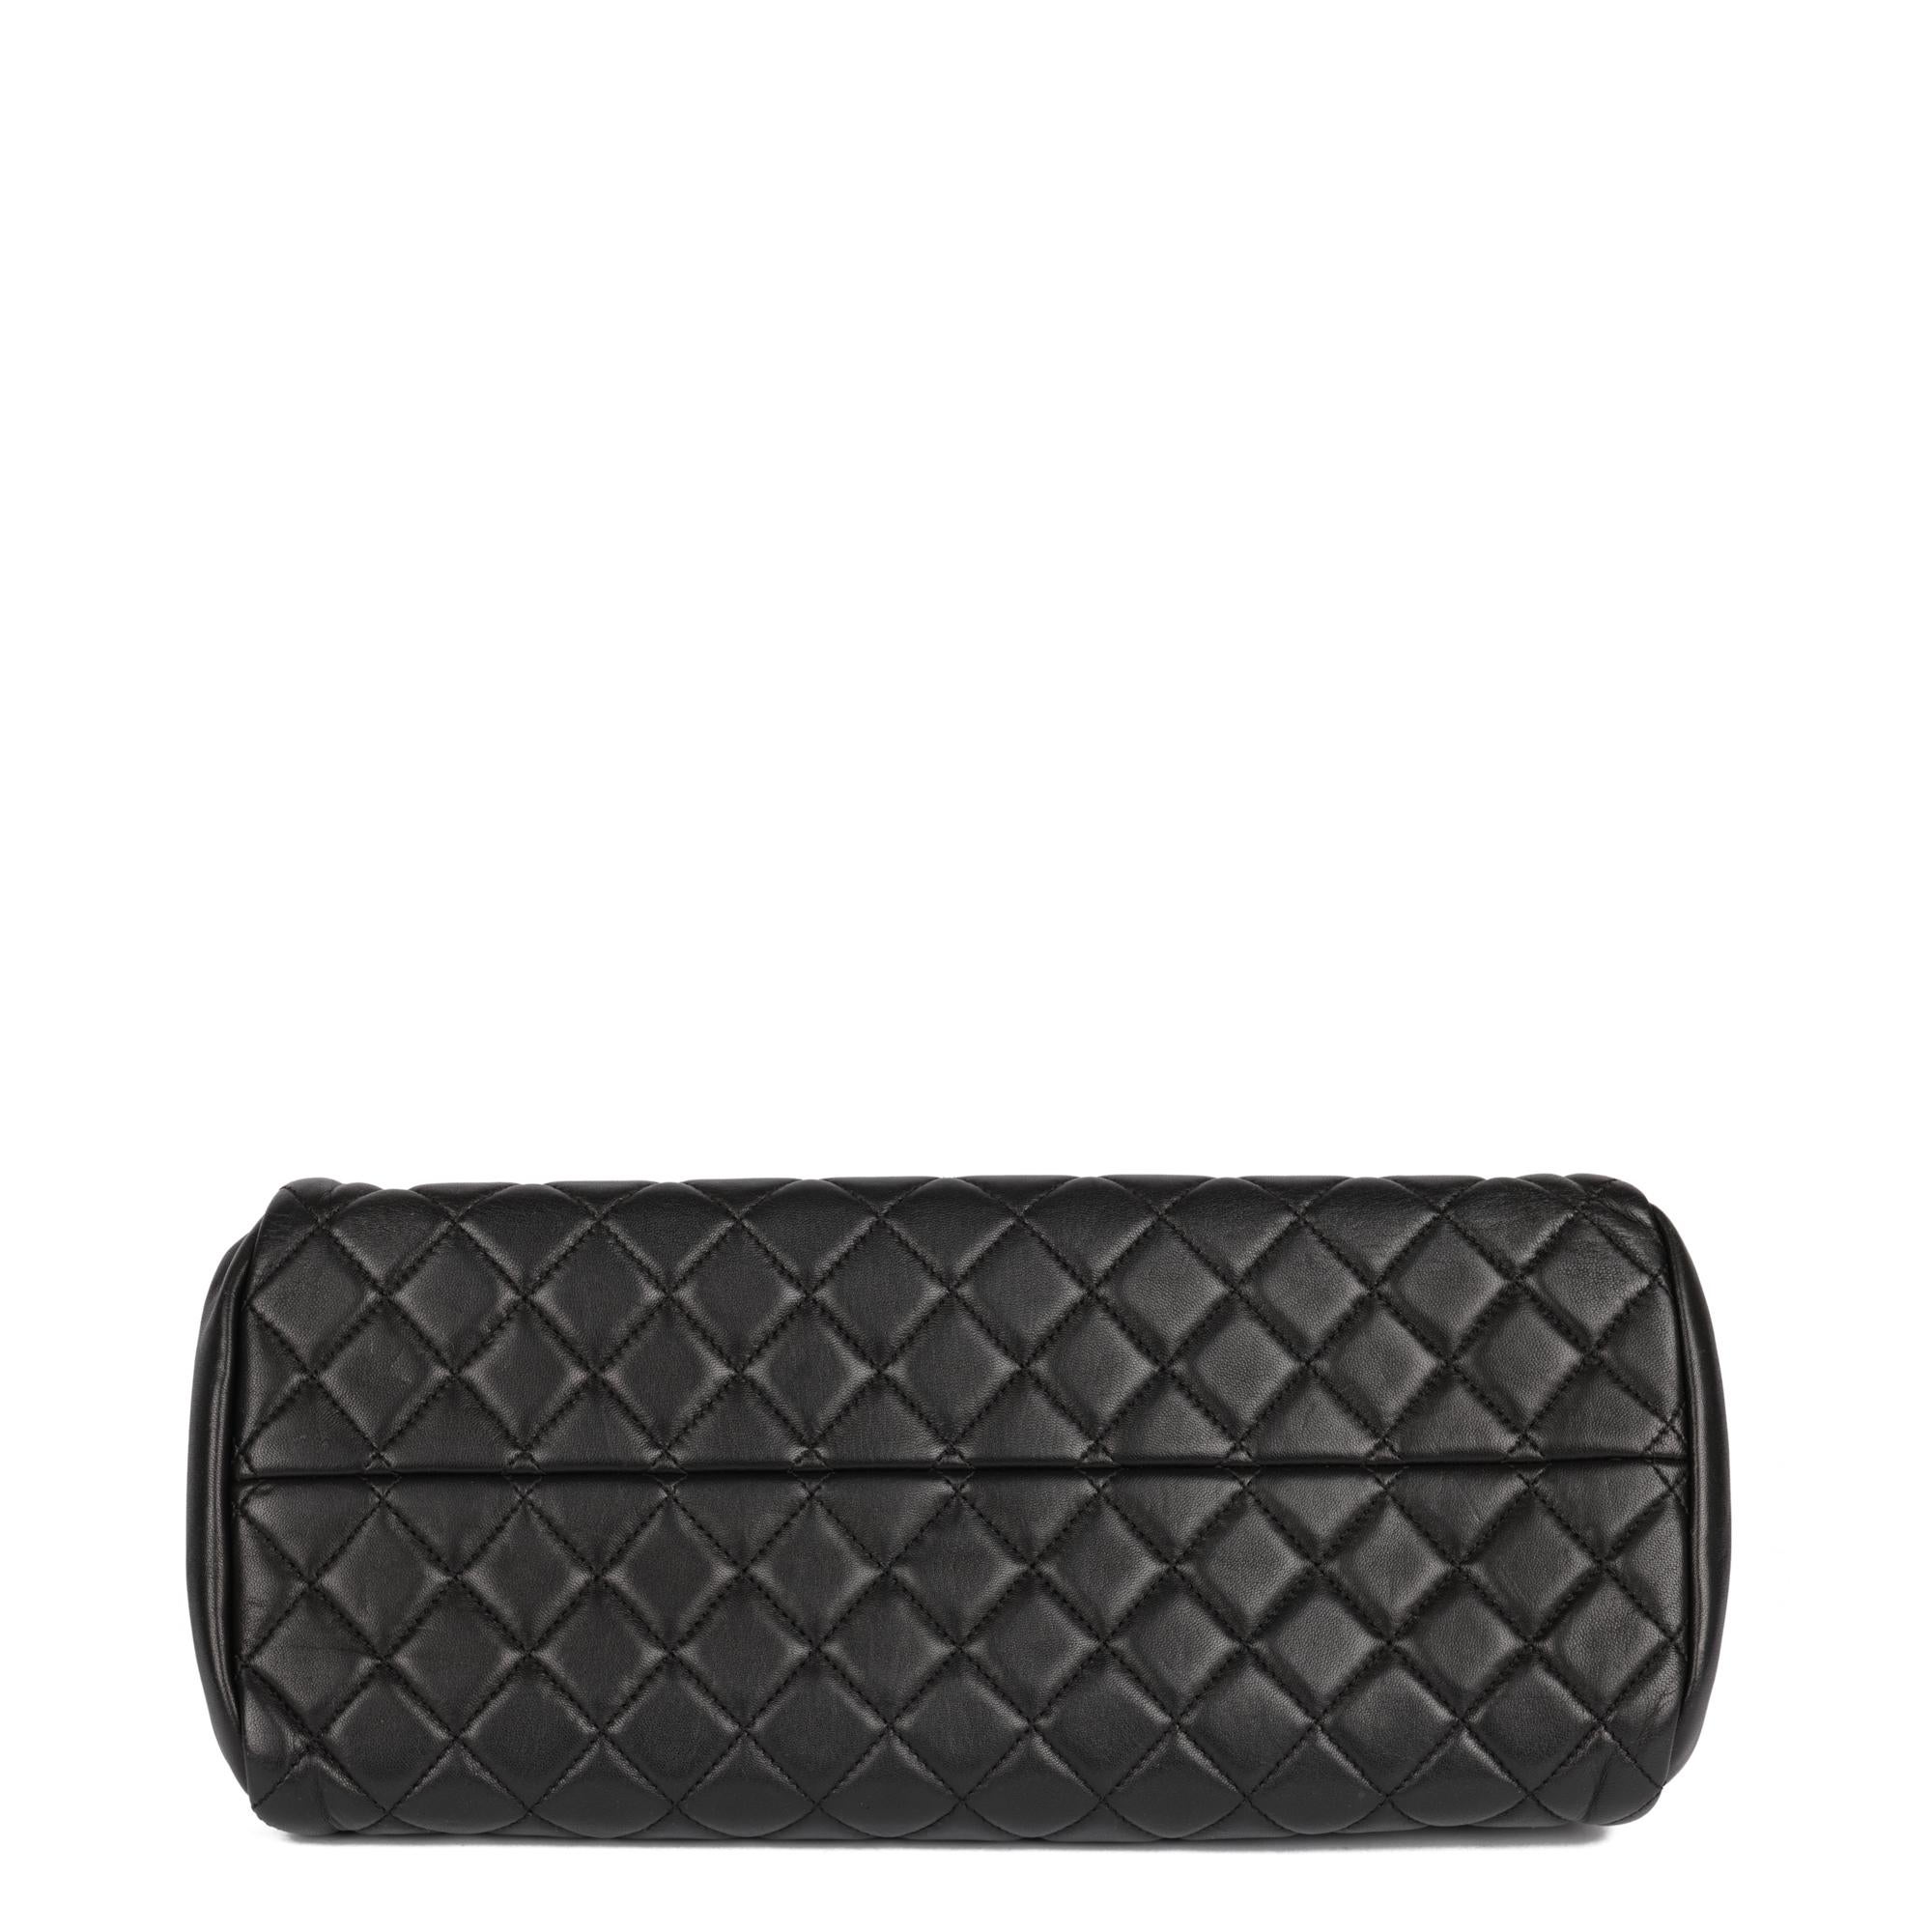 CHANEL Black Quilted Lambskin Just Mademoiselle Bowling Bag 2